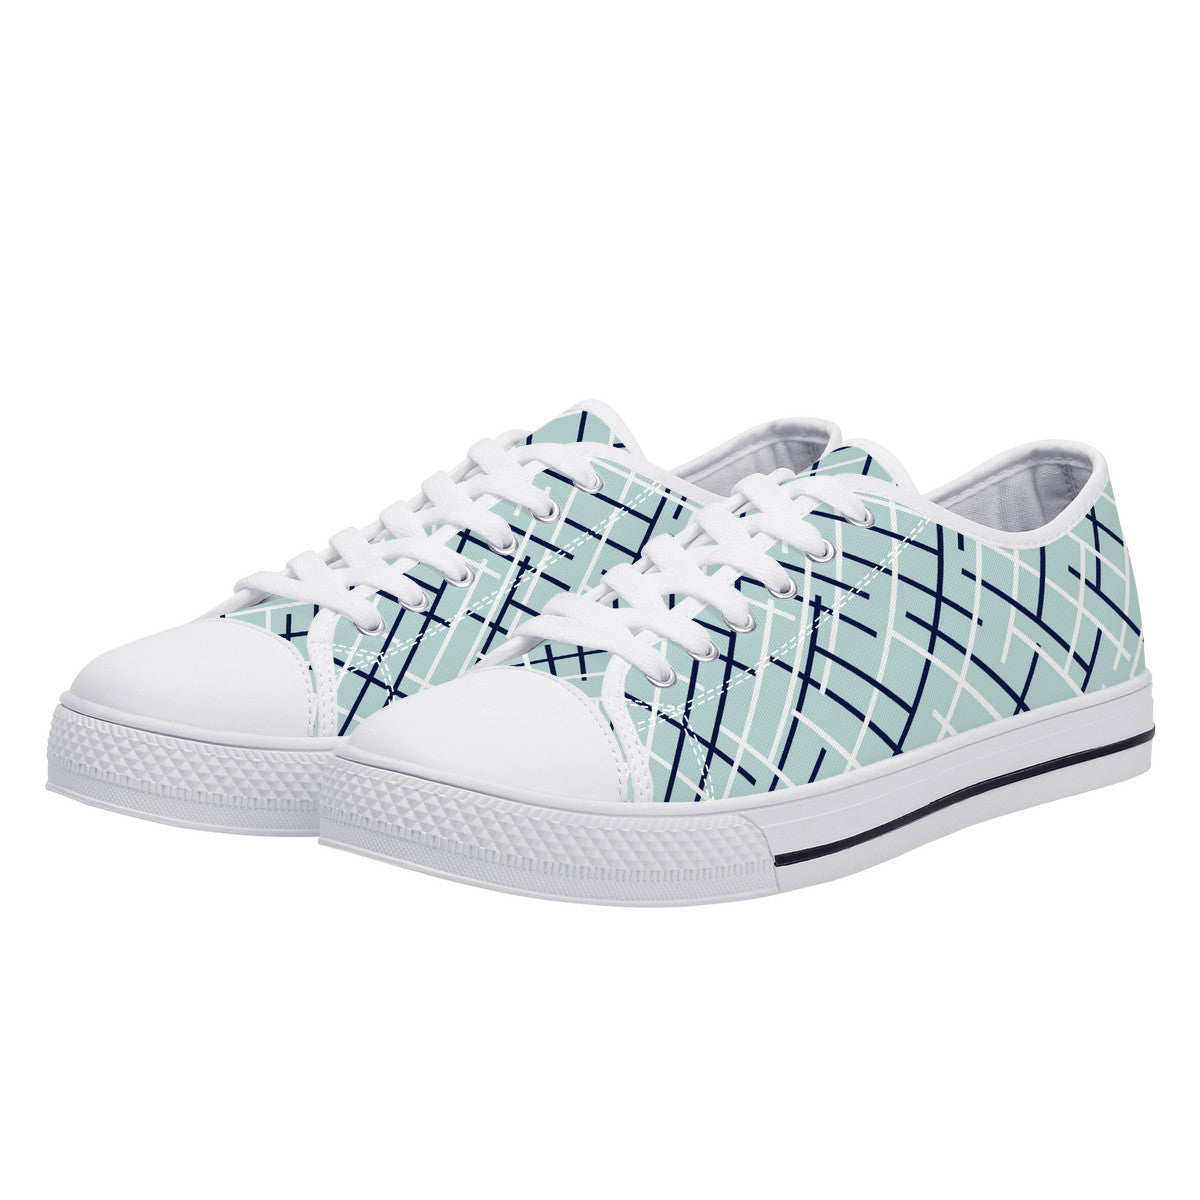 Aqua with Abstract Line Design Canvas Sneakers